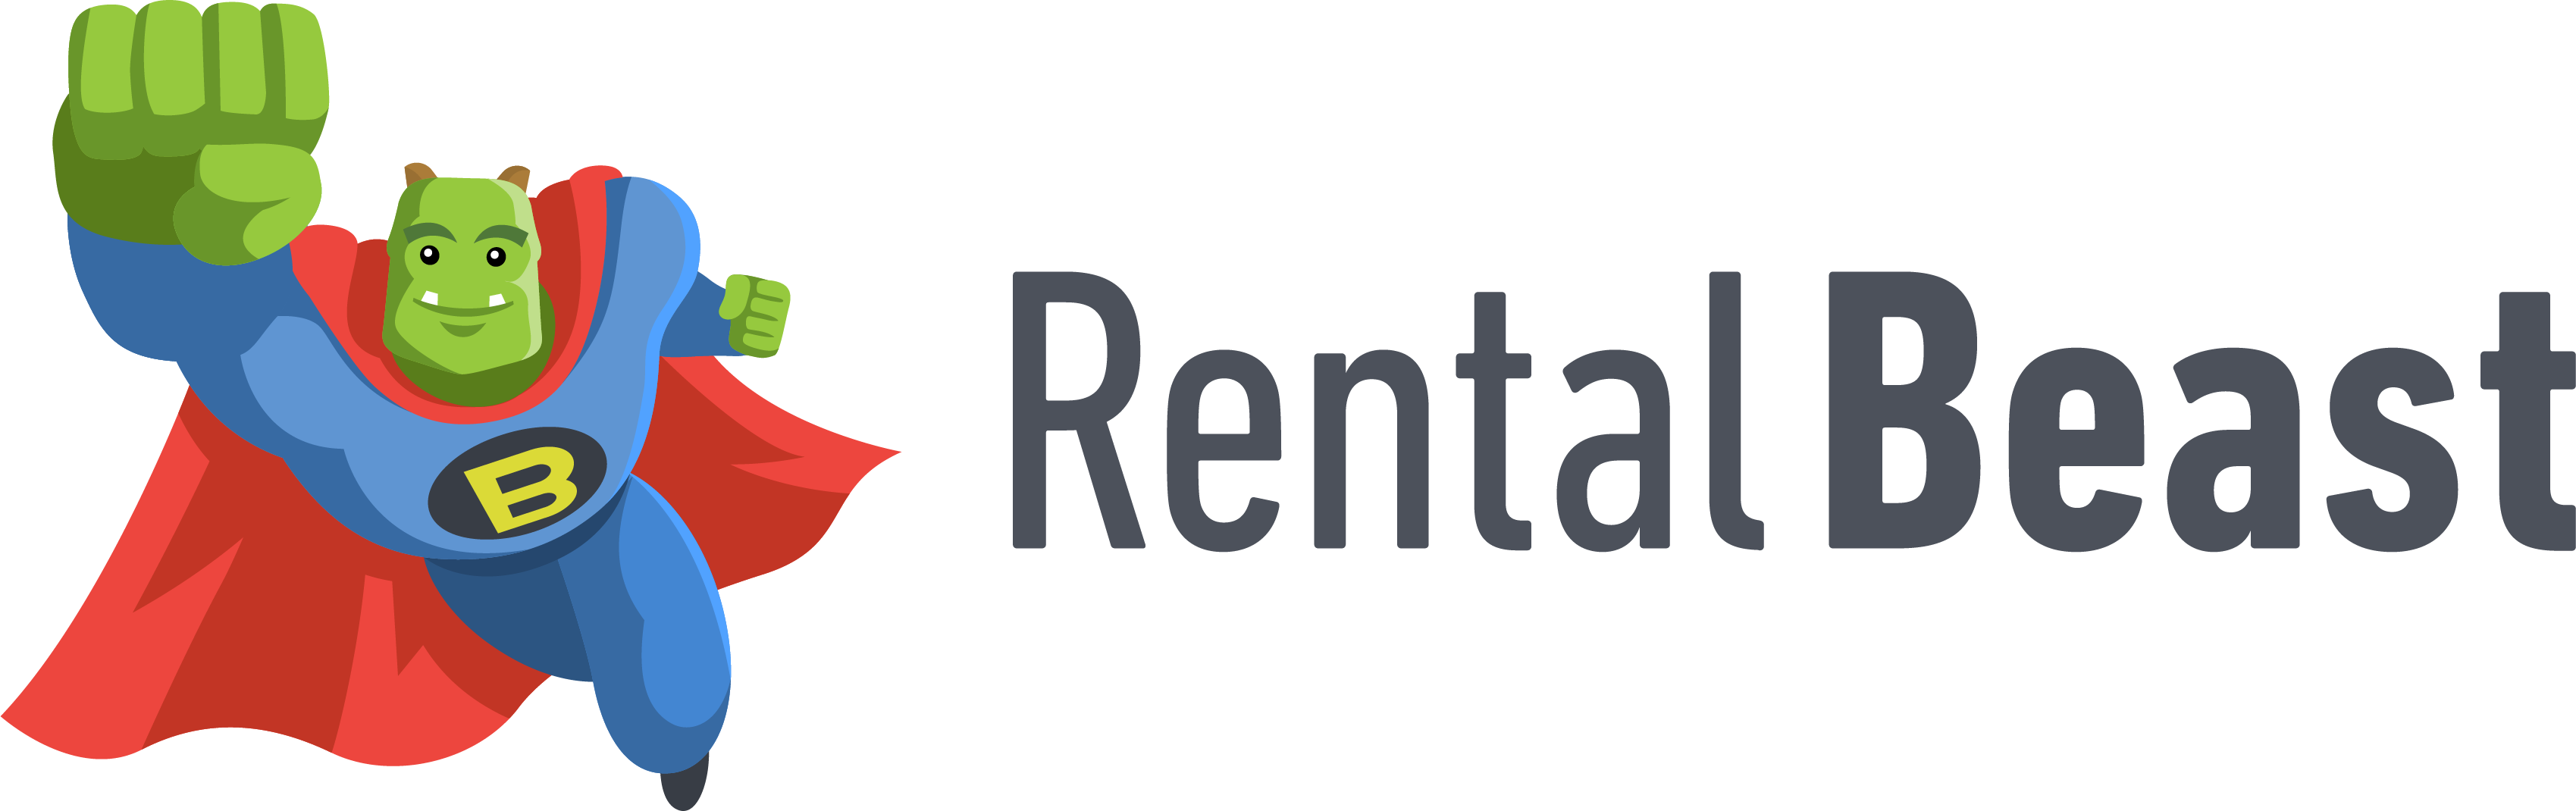 Rental Beast Partners With Midwest Real Estate Data